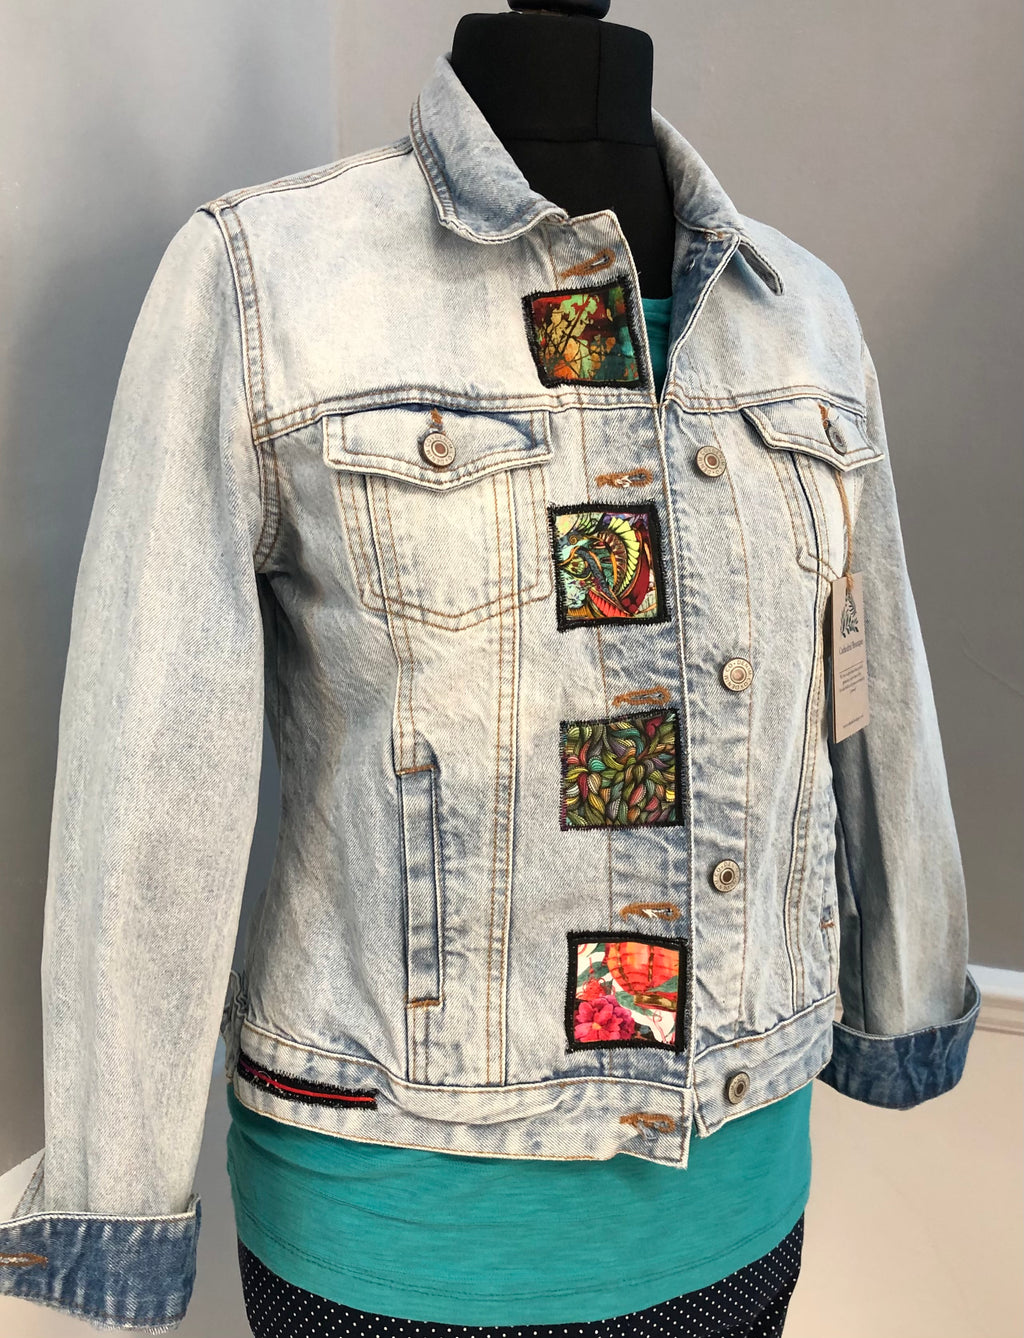 Re-Styled Denim Jacket by Trish (silk patches)